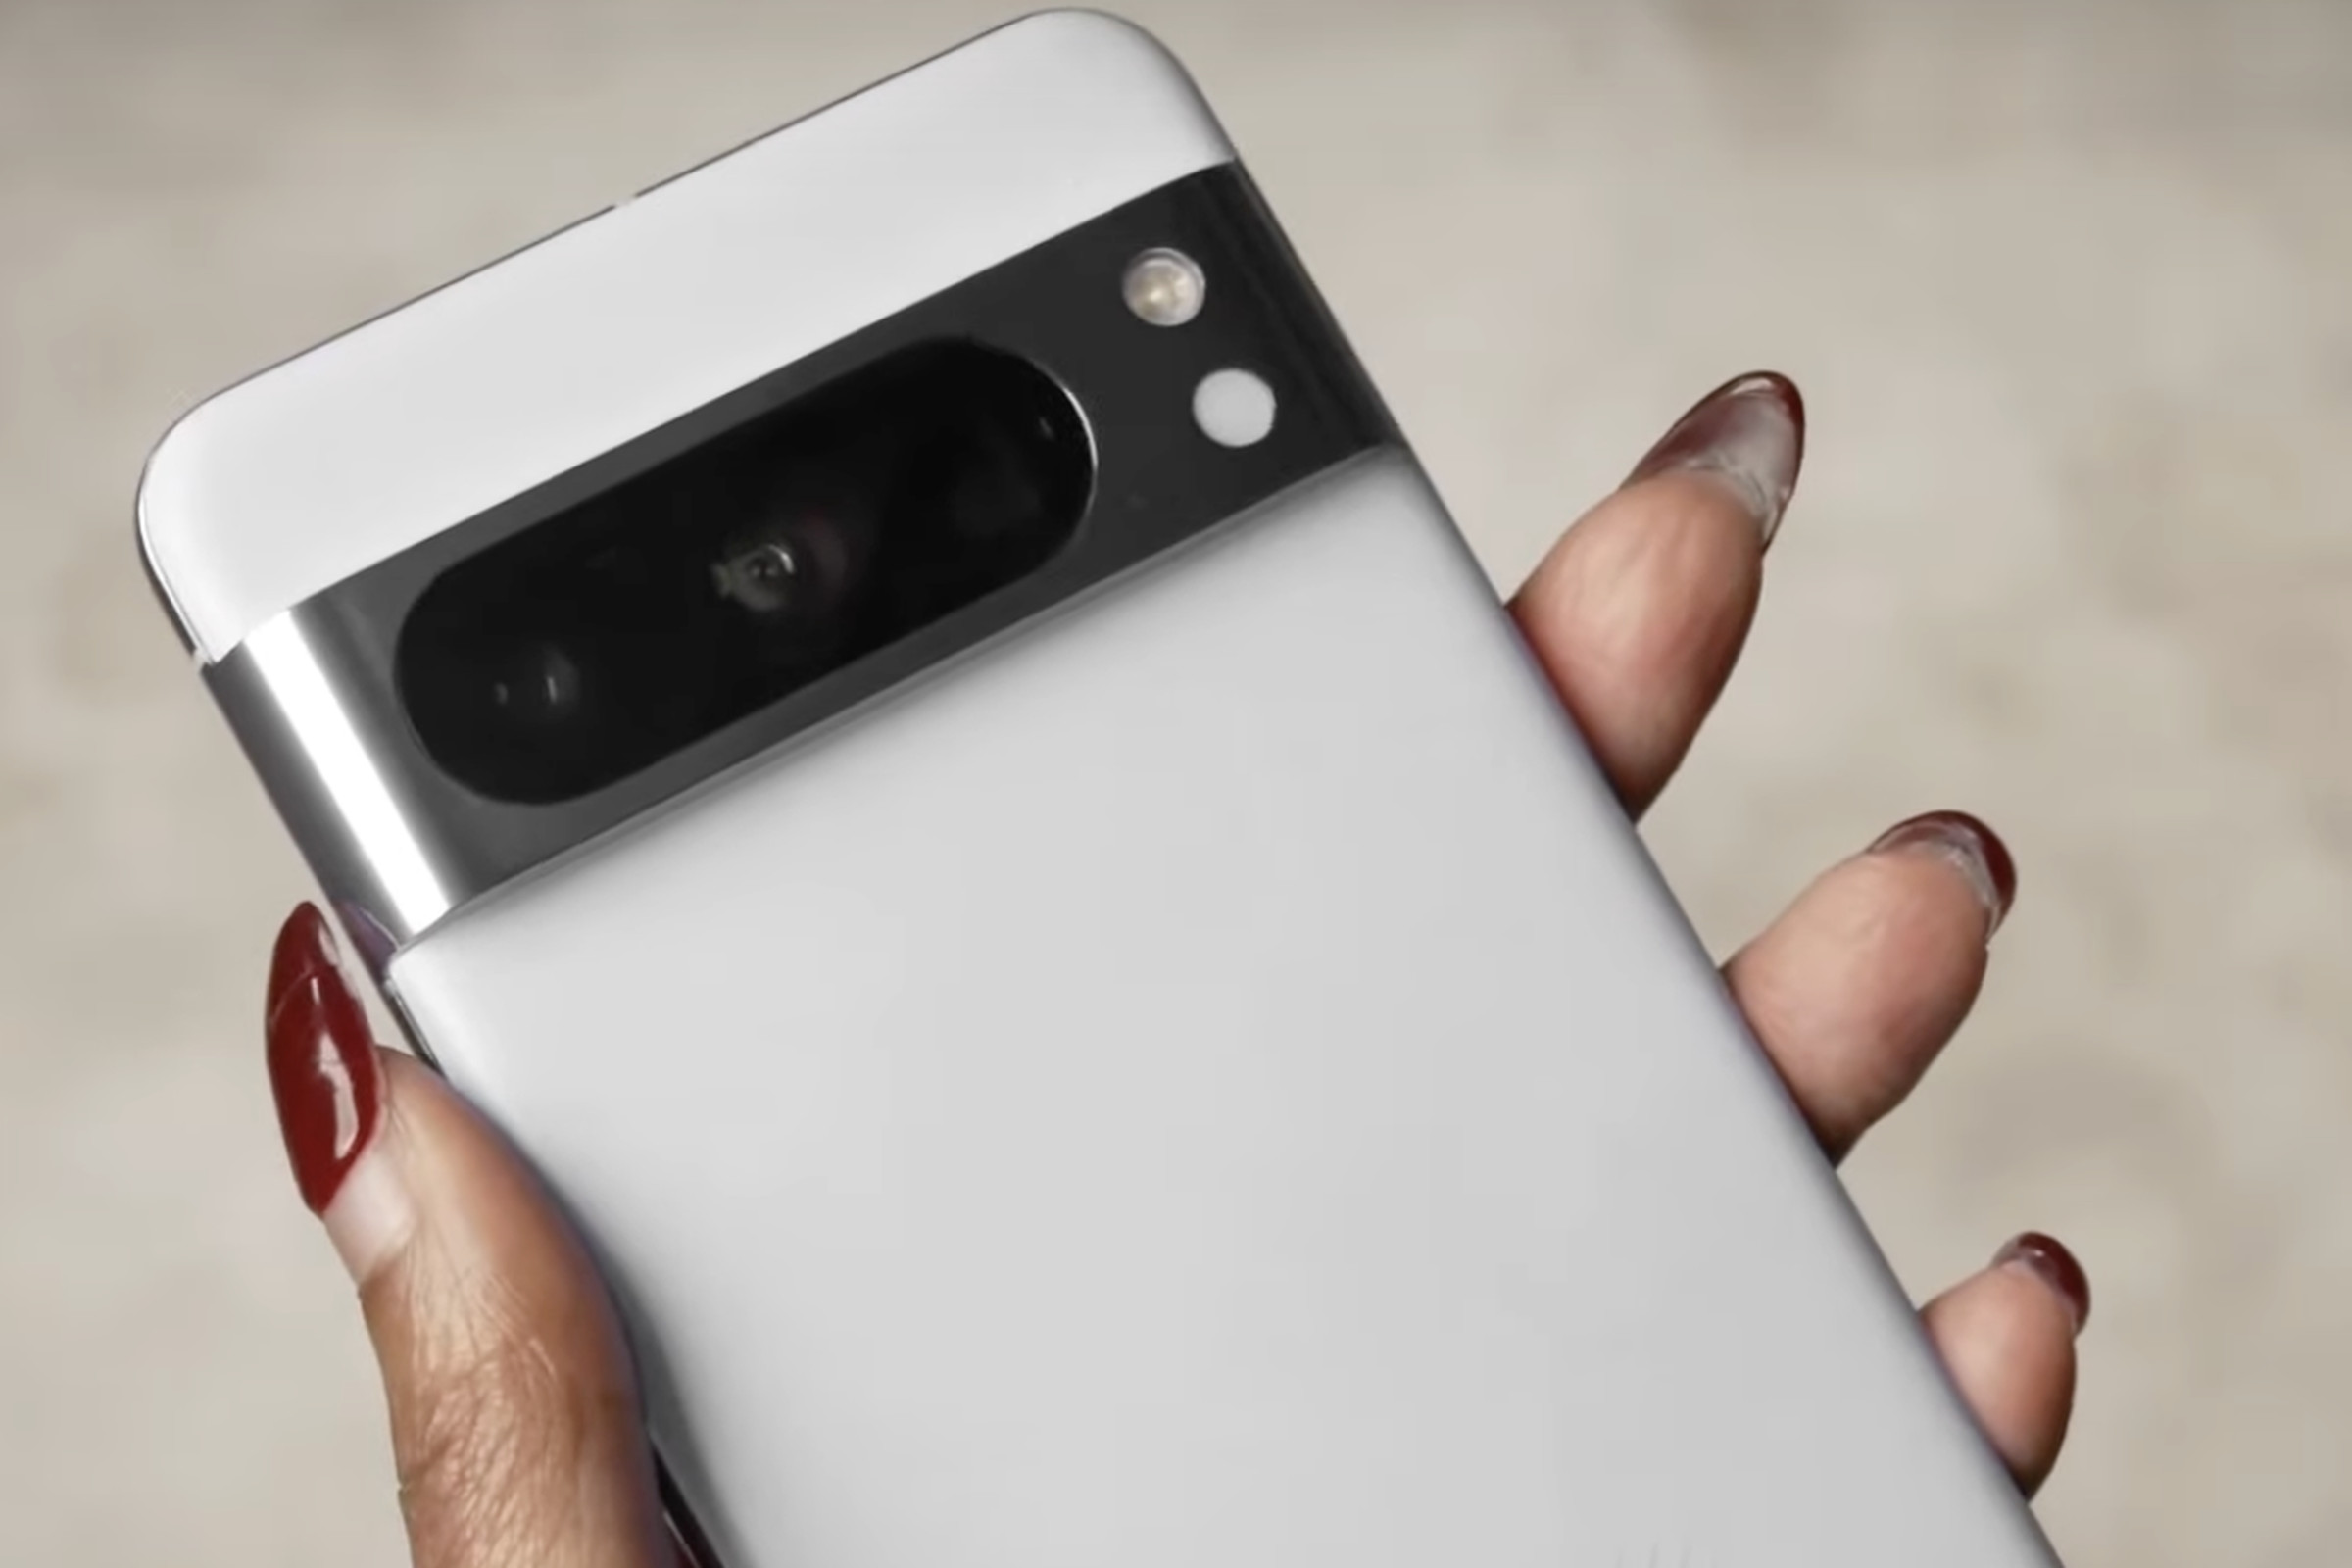 A screenshot showing the back of Google’s Pixel 8 Pro smartphone.